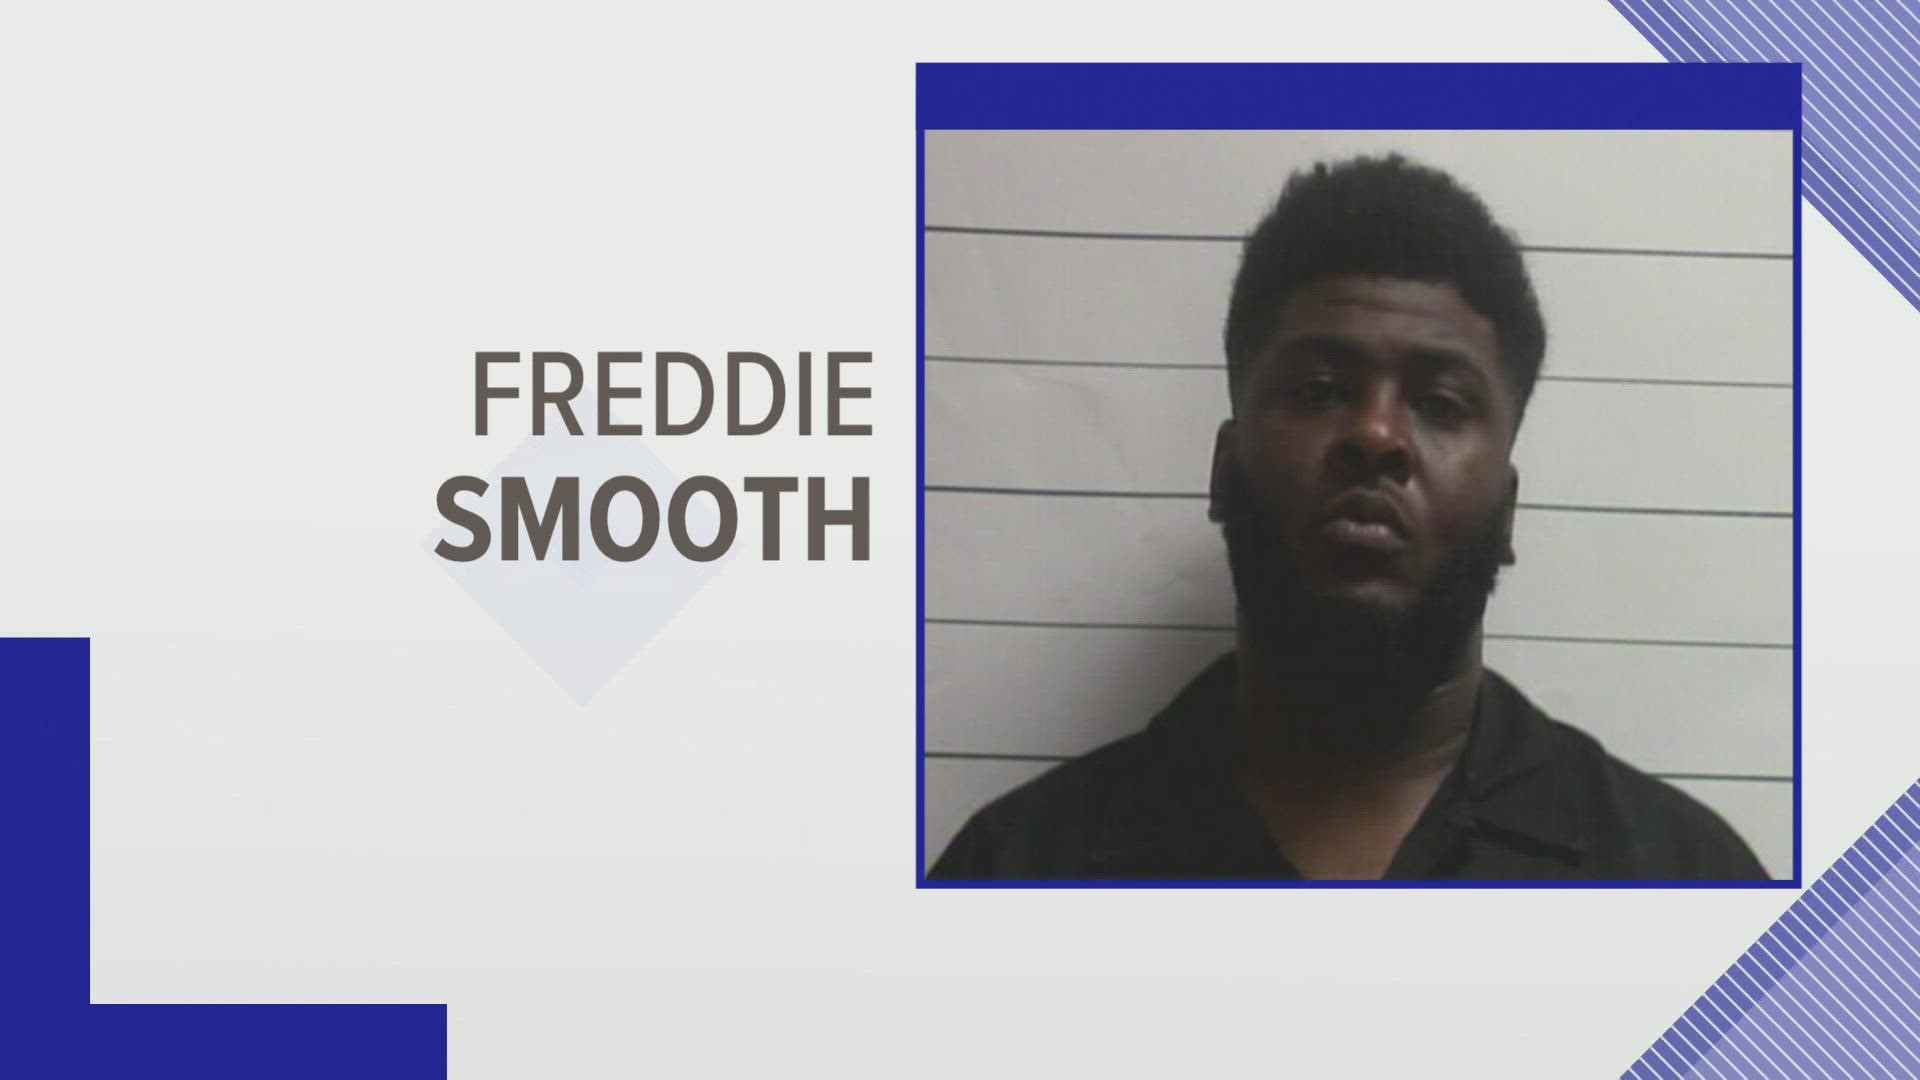 Freddie Smooth has been arrested in the case of the shooting death of Monique Blunt who was shot and killed while in her car in November.